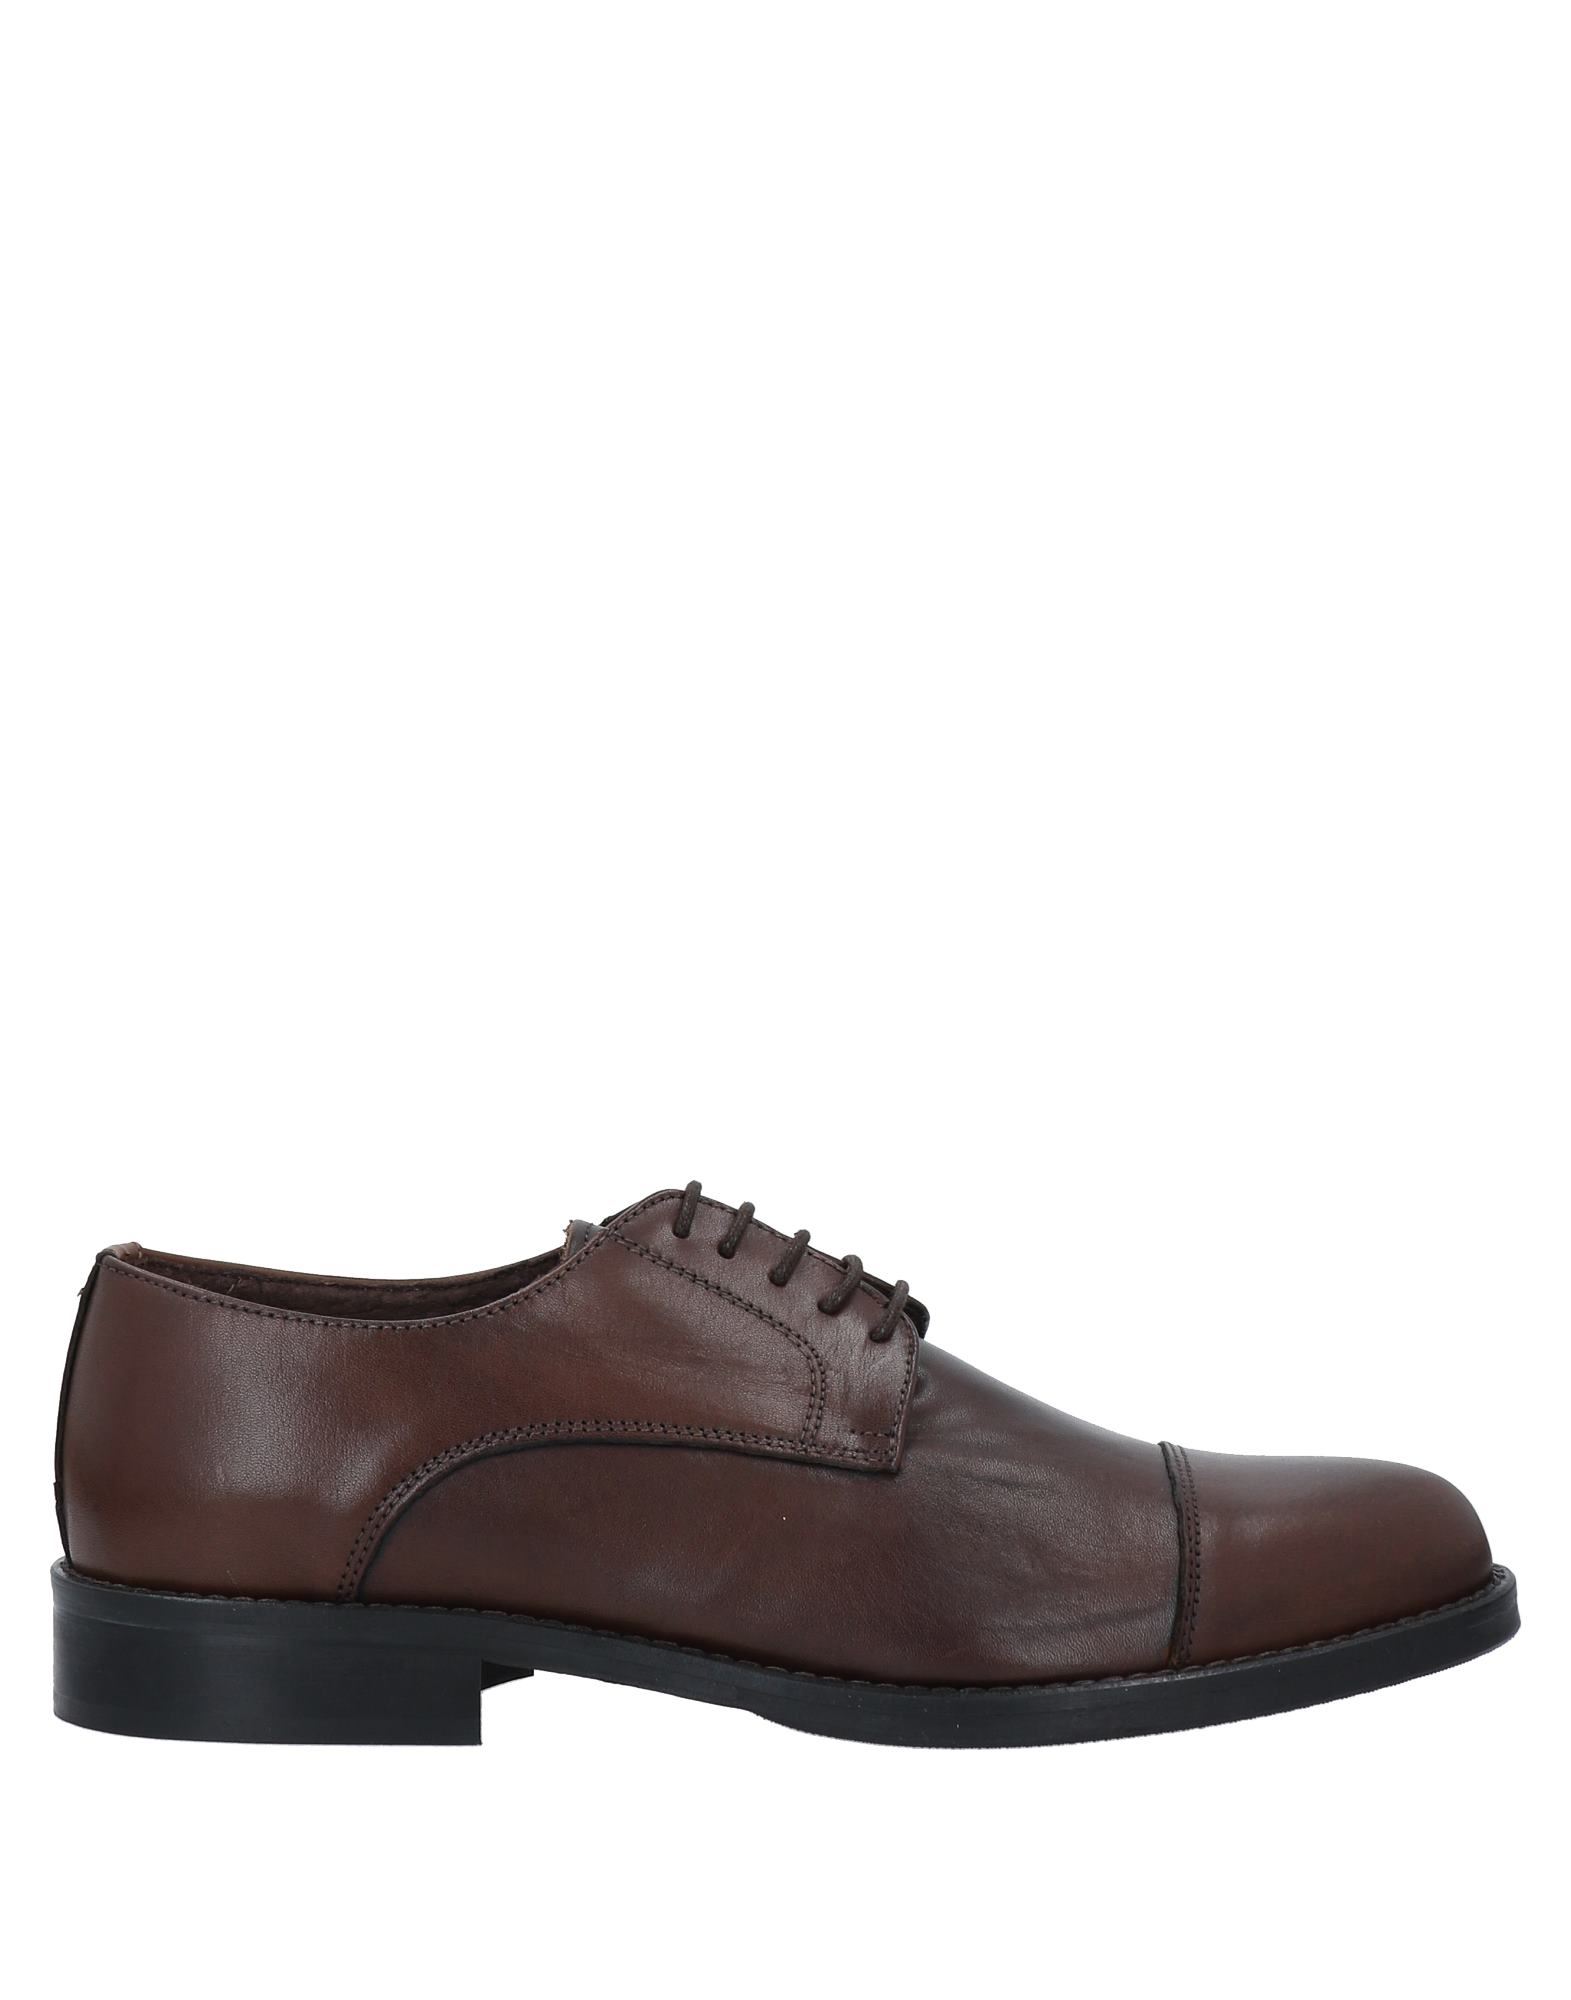 FABIO SCHEMBER Lace-up shoes